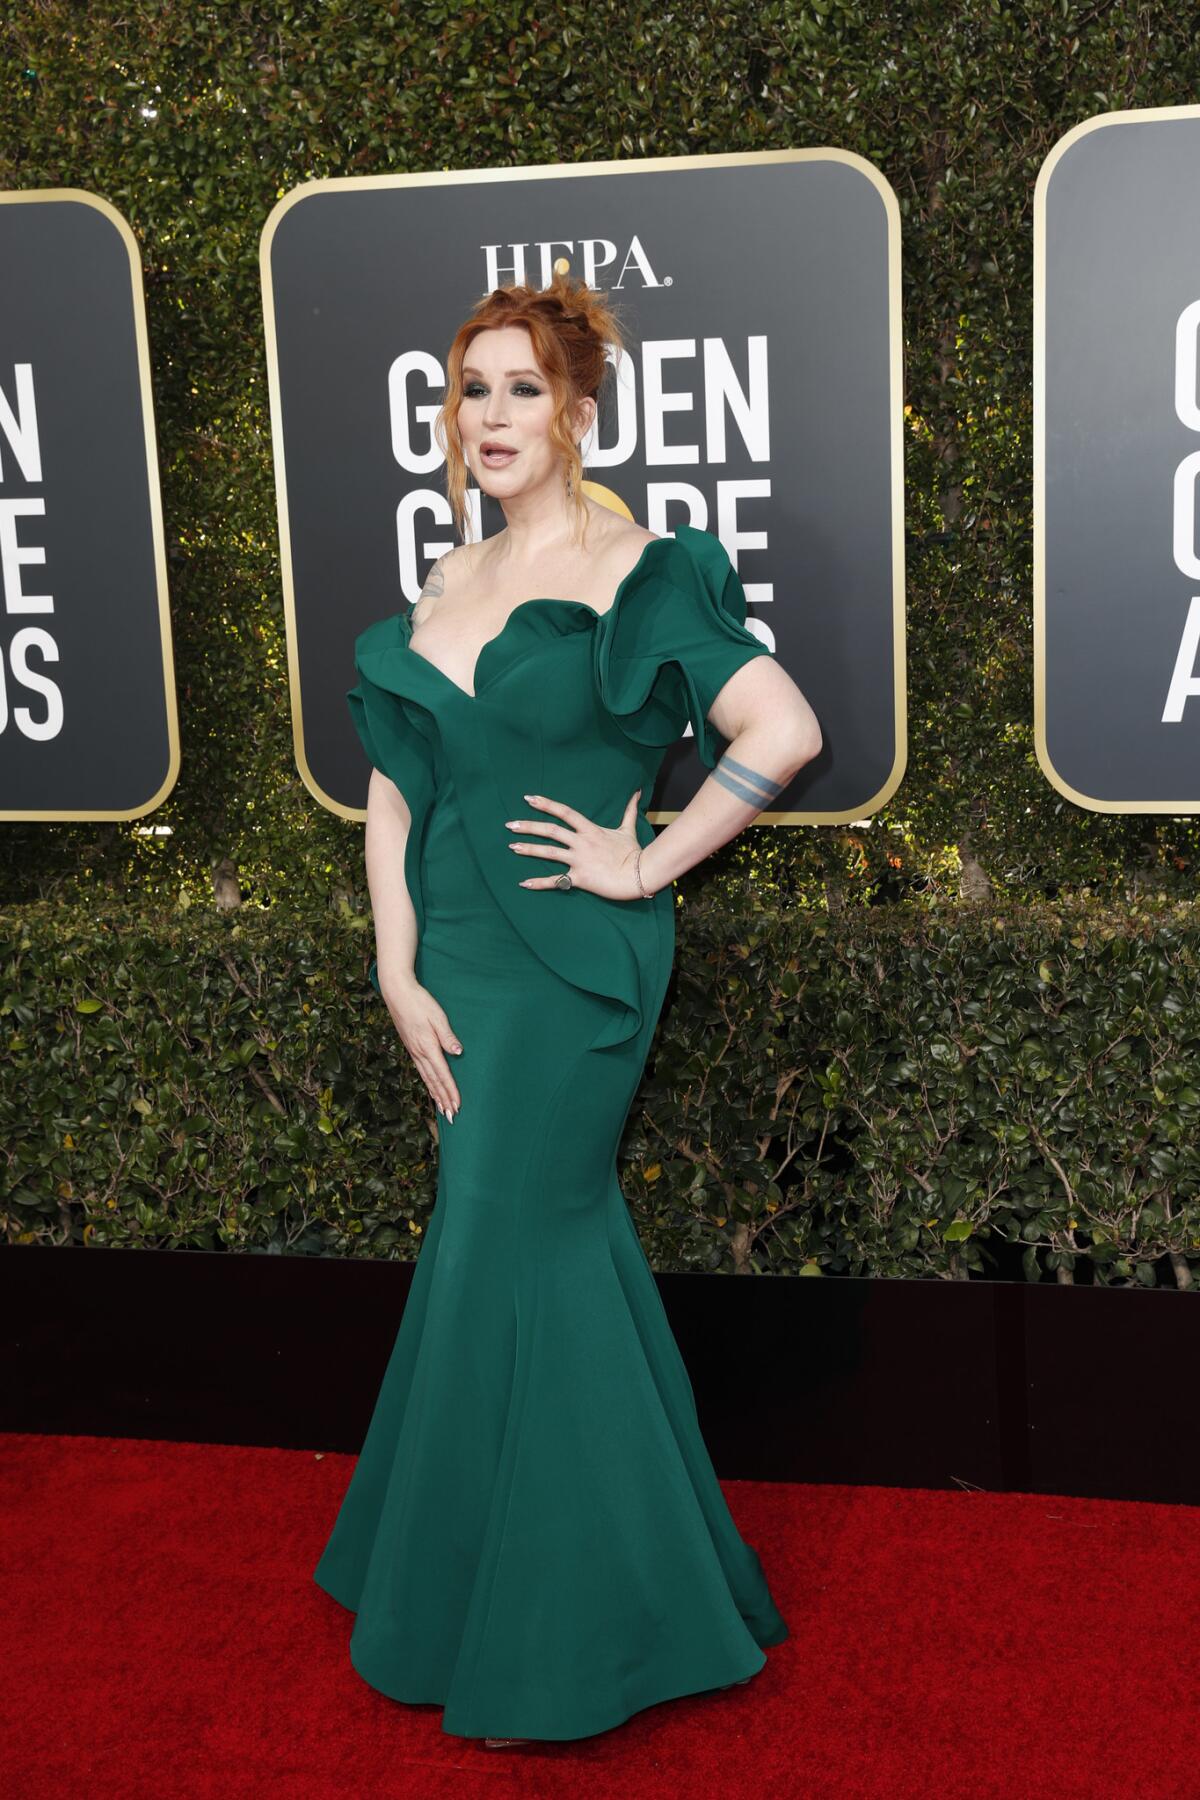 Our Lady J arrives at the 76th Golden Globes at the Beverly Hilton in Beverly Hills on Jan. 6.